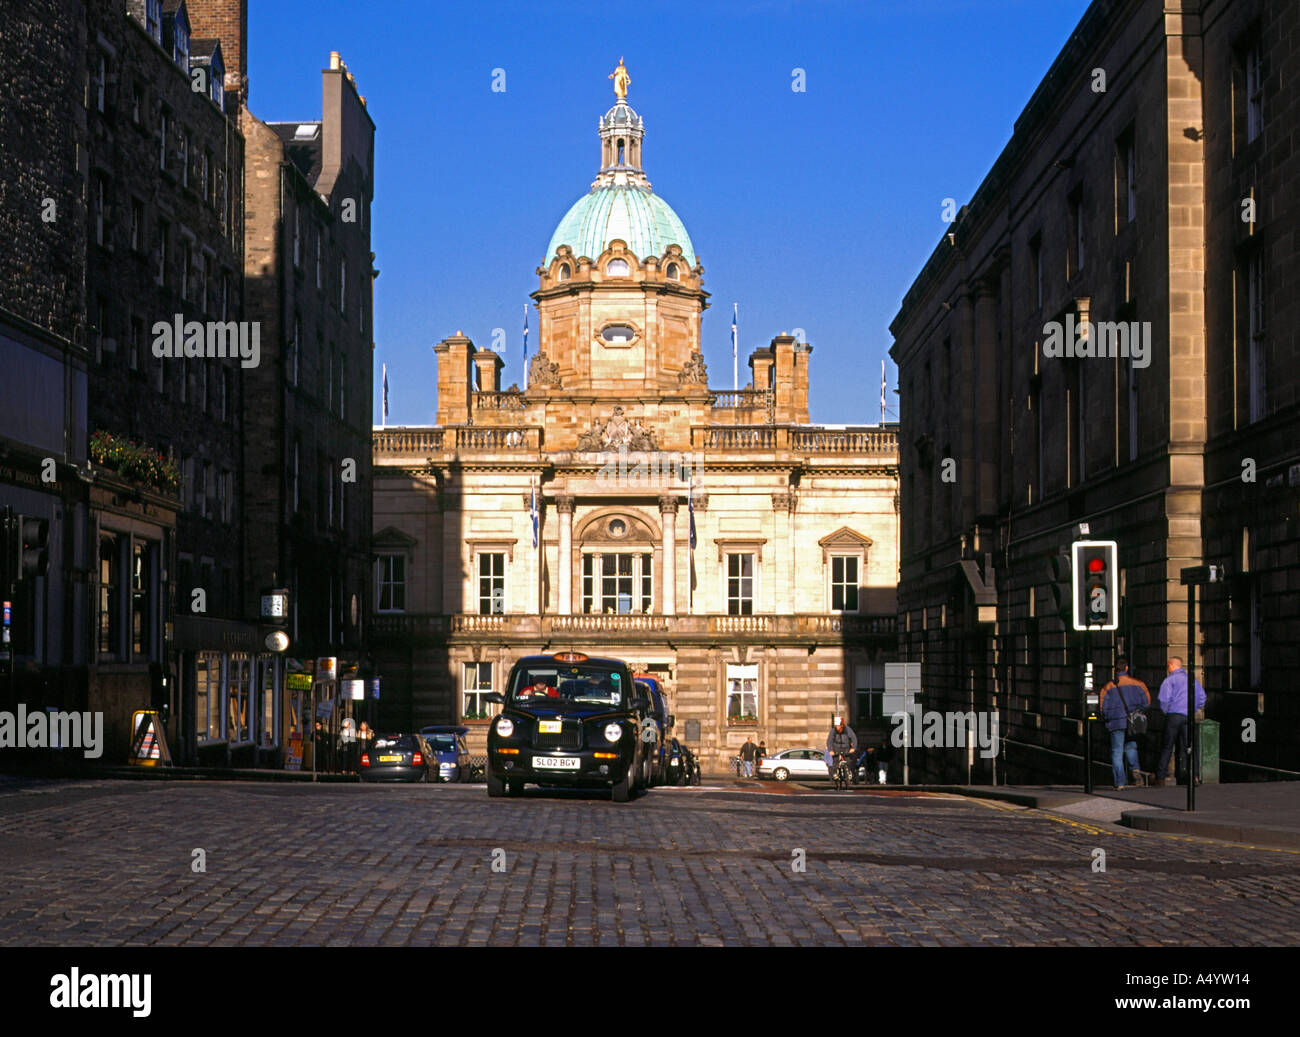 dh  THE MOUND EDINBURGH Bank of Scotland headquarters traffic hbos hq financial business district Stock Photo